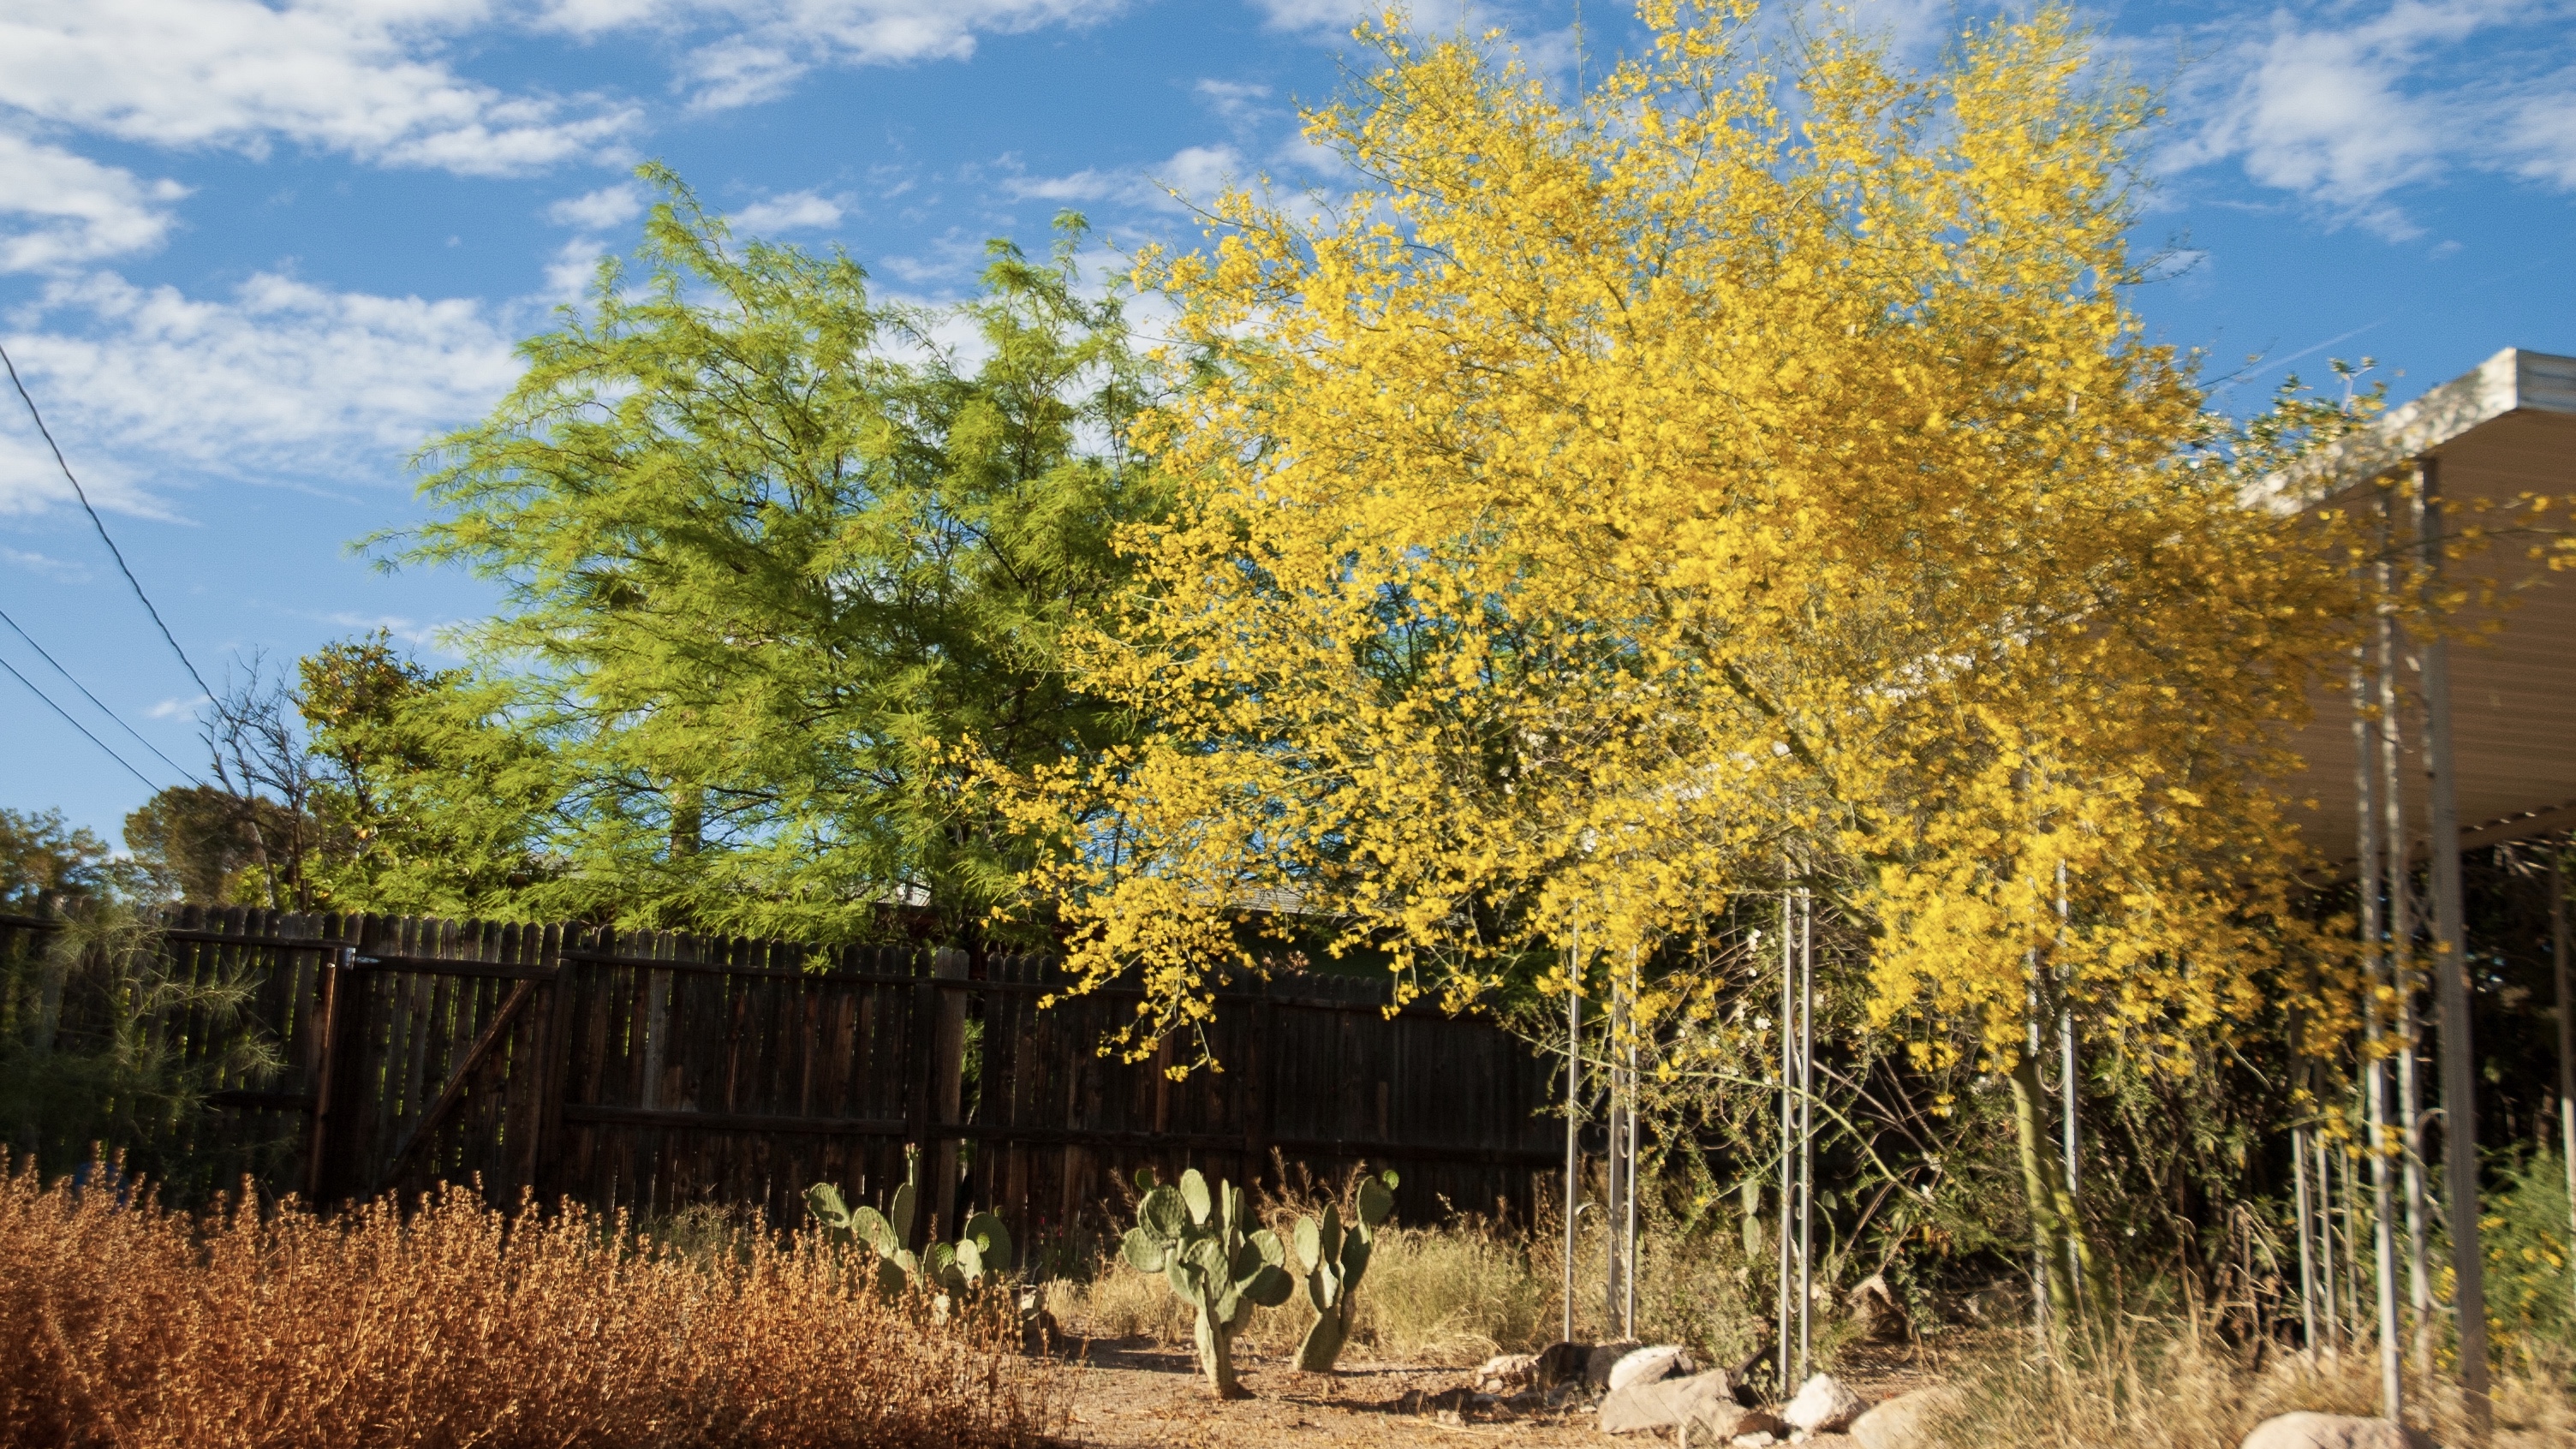 Photo of trees turning yellow in a backyard